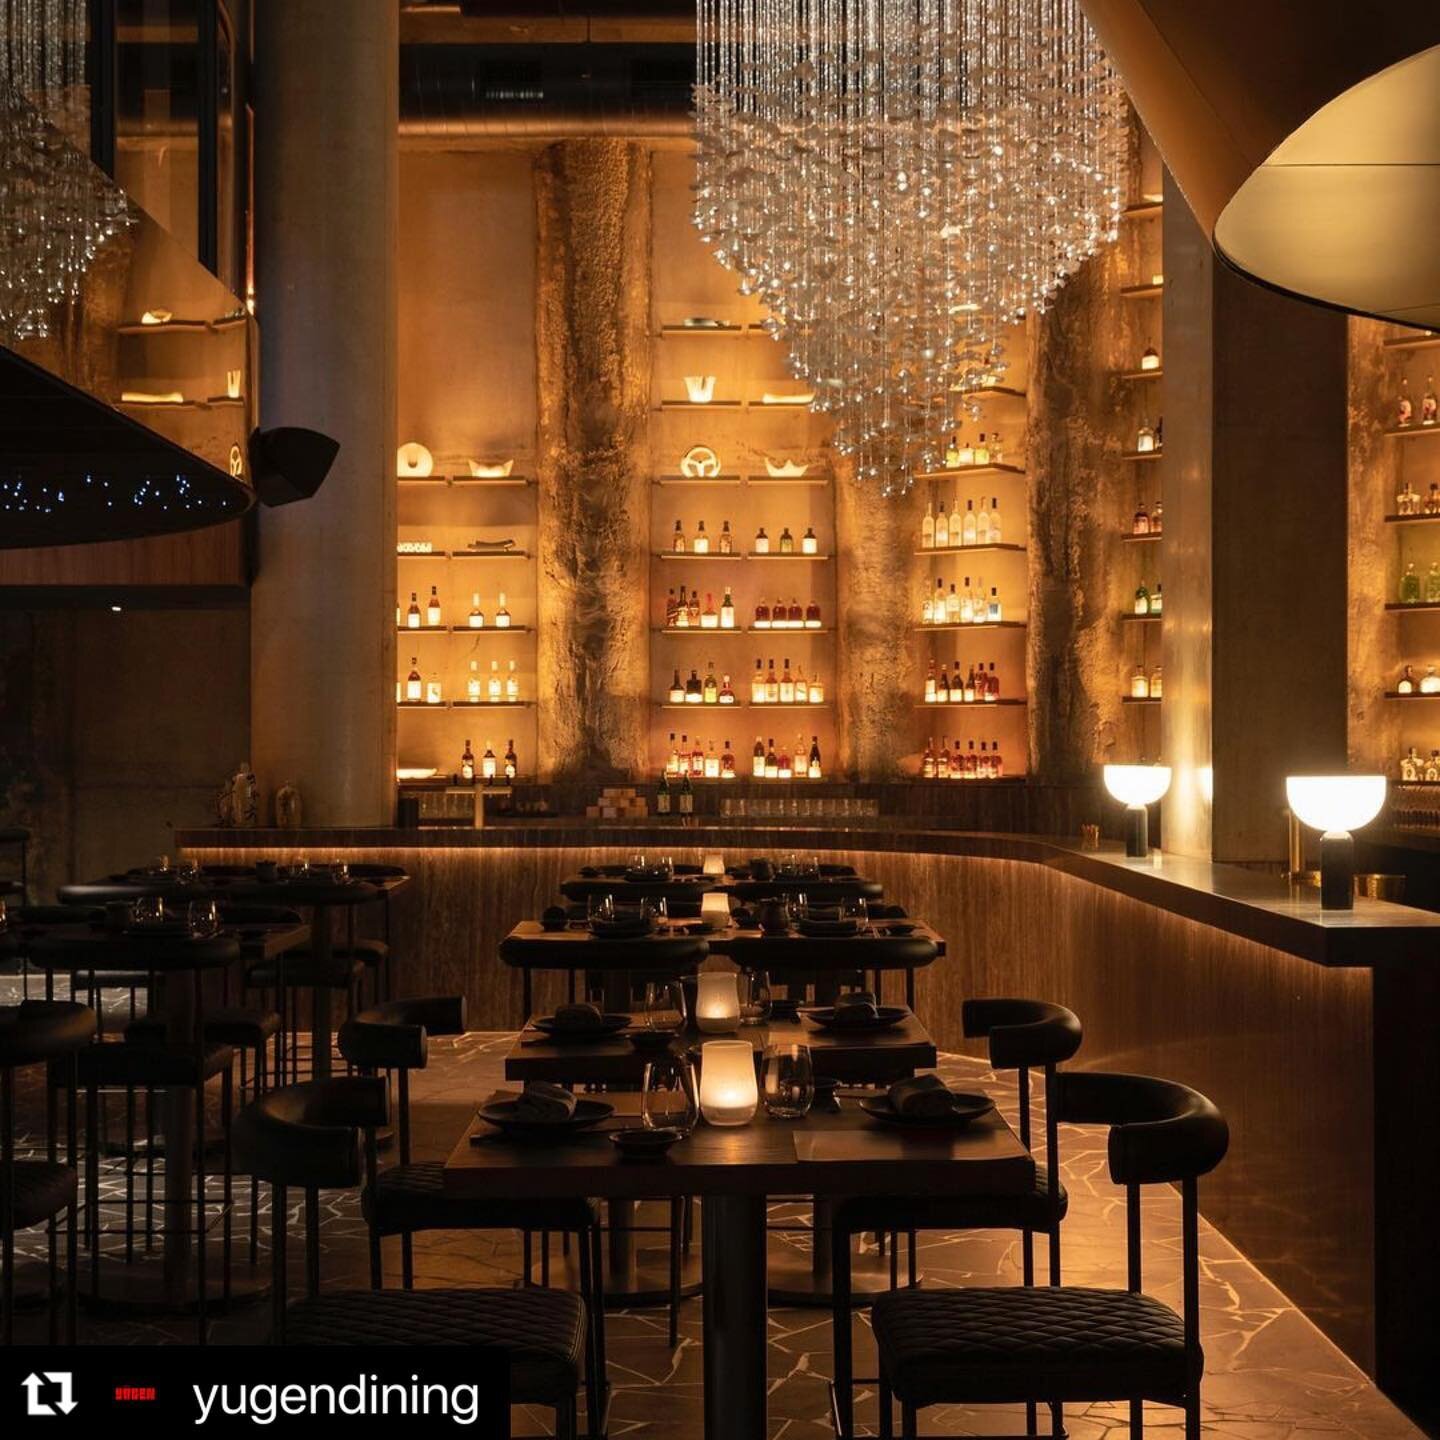 @yugendining officially opened this weekend. So wonderful to work on this special project. 

Photography: @marcelaucar 
Development: @capitolgrand_ 
Architecture: @architectseat
Interiors: @eatinteriors
Industrial Design of canopy:  @random_spaces

#